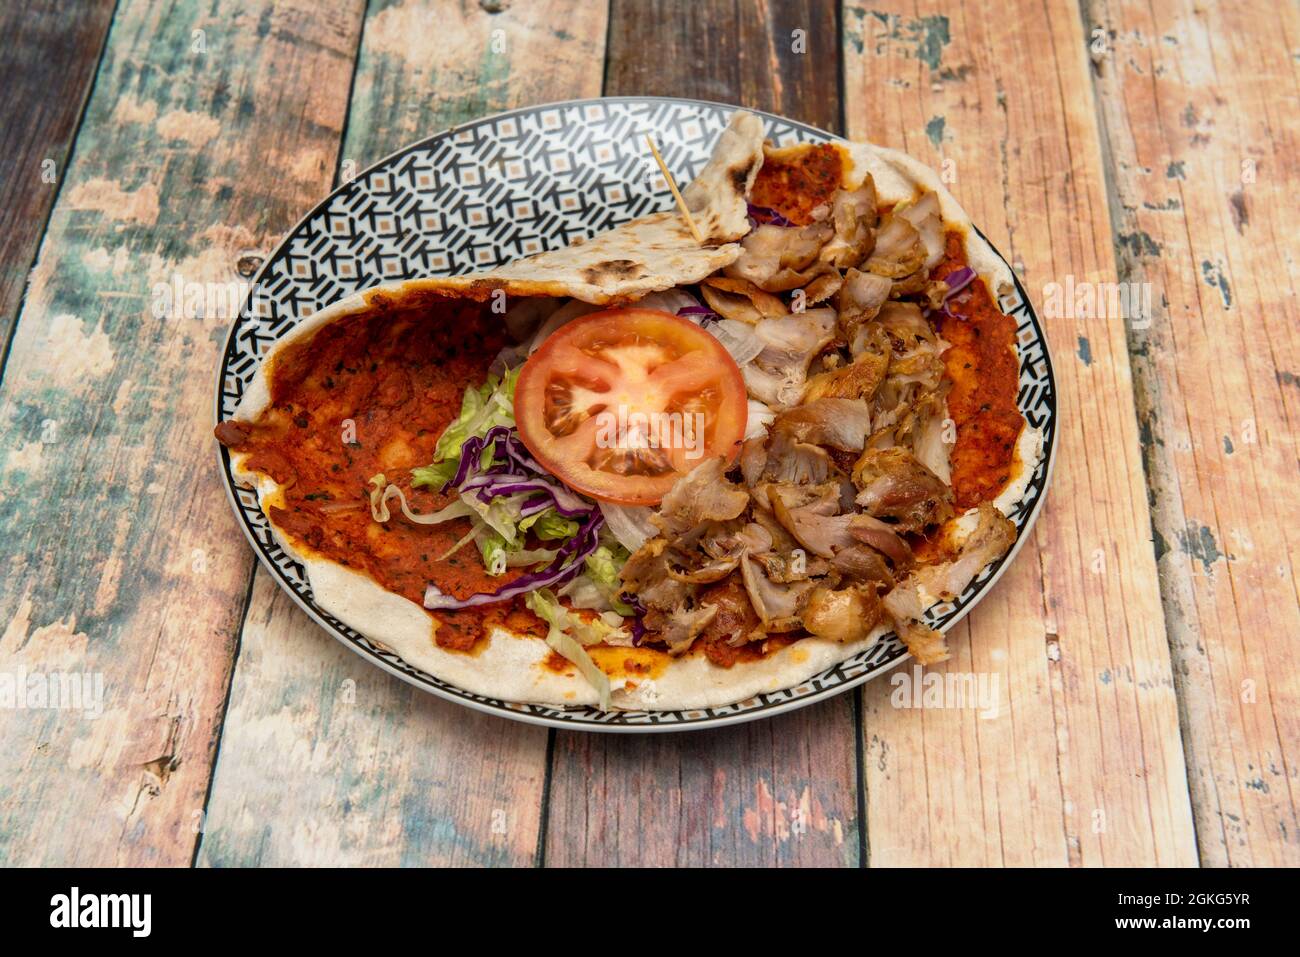 Lahmacun cooked by Arab chef with lamb kebab meat, tomato slice, white onion, purple kale on nice plate Stock Photo